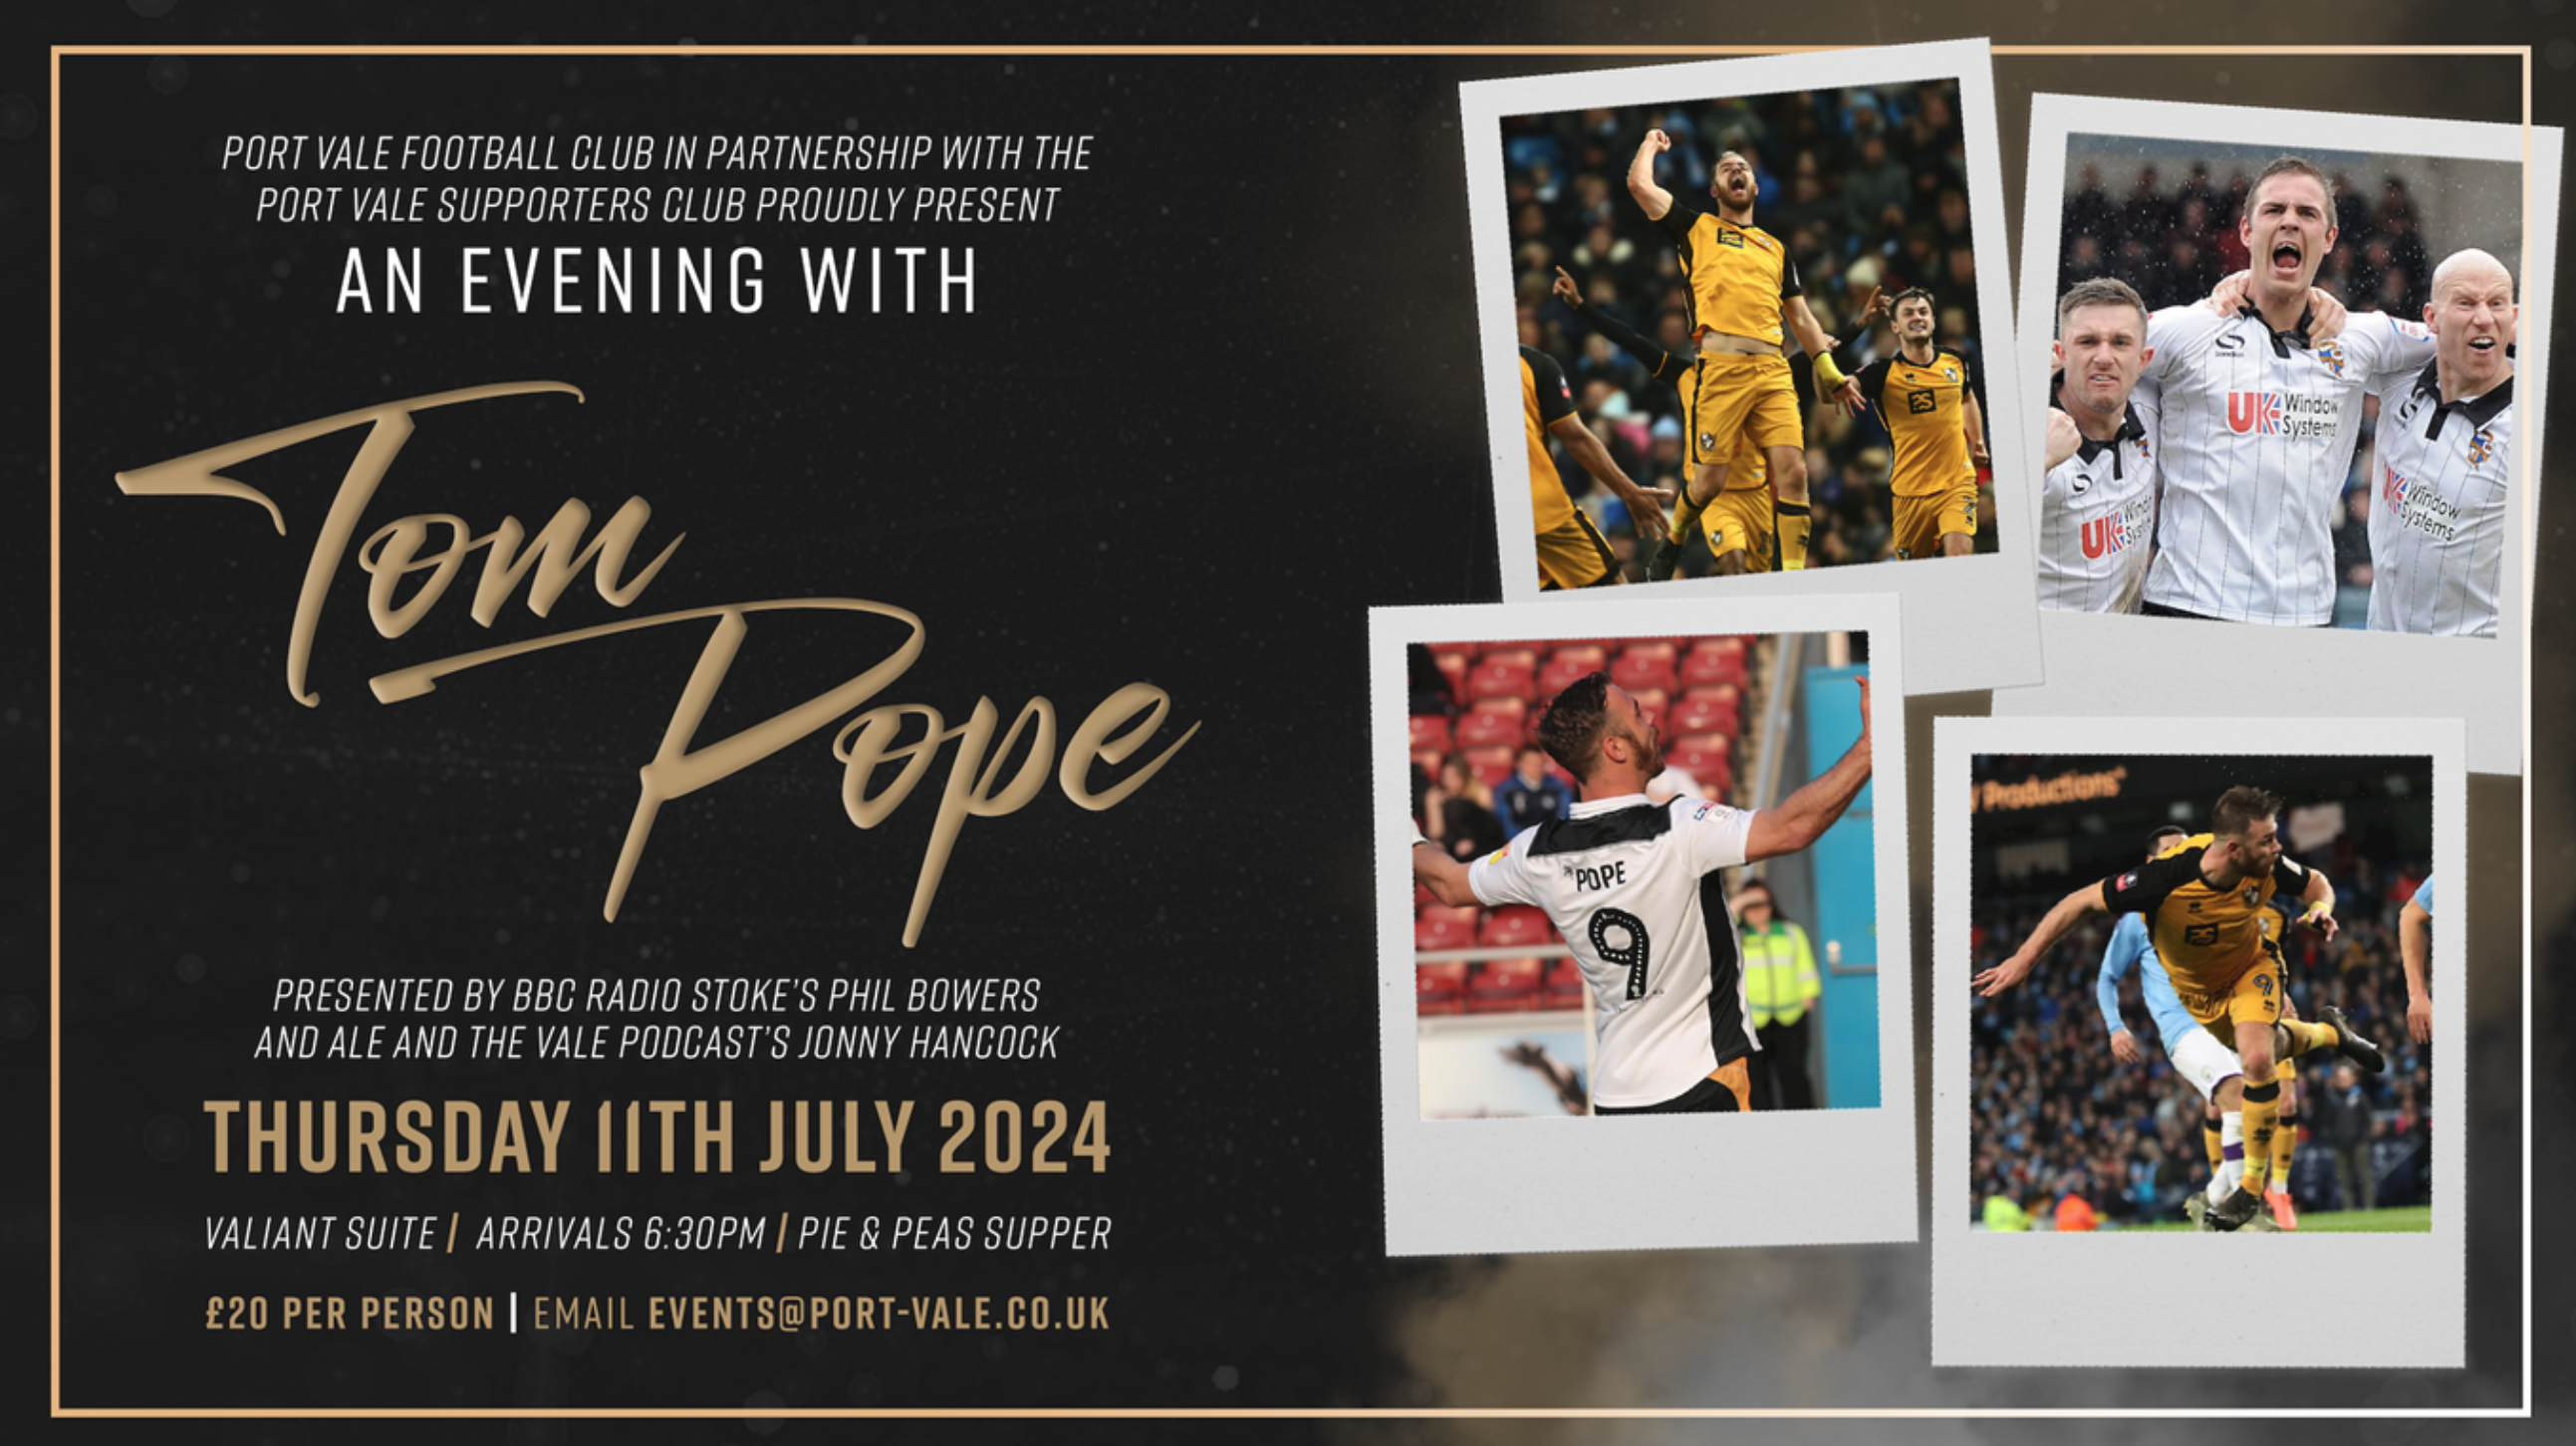 An Evening with Tom Pope